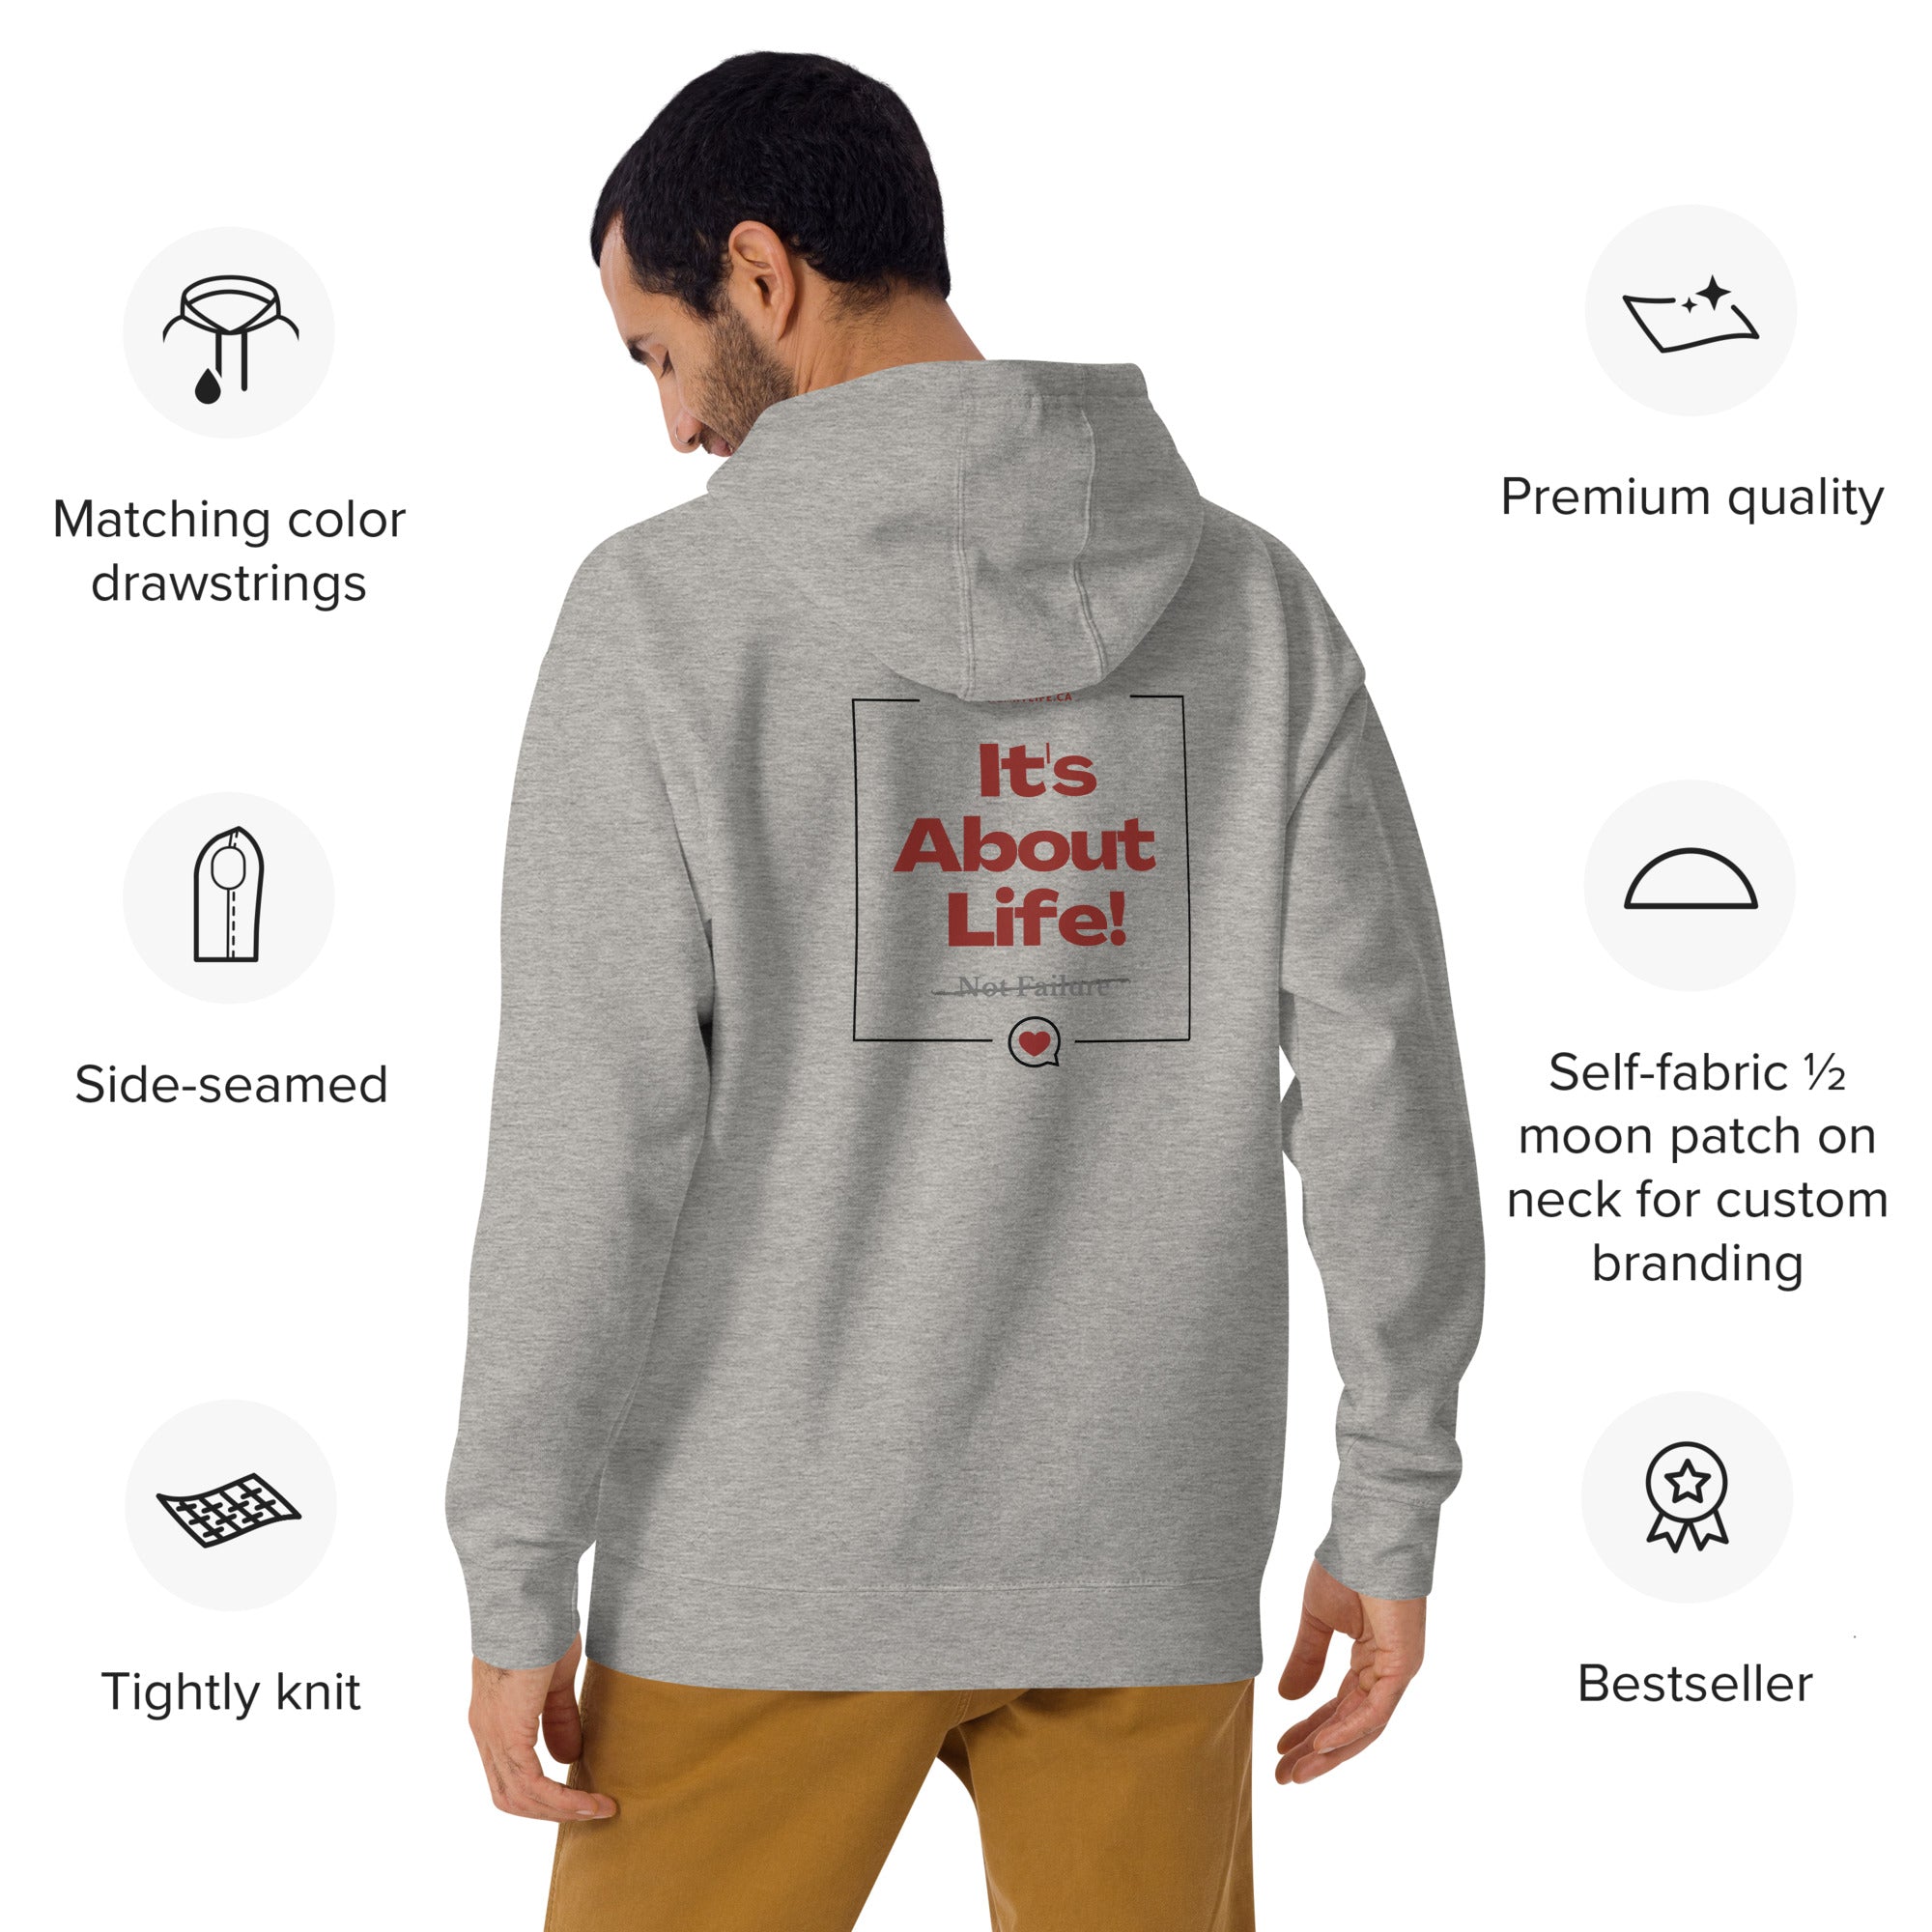 "It's About Life!" Unisex Hoodie